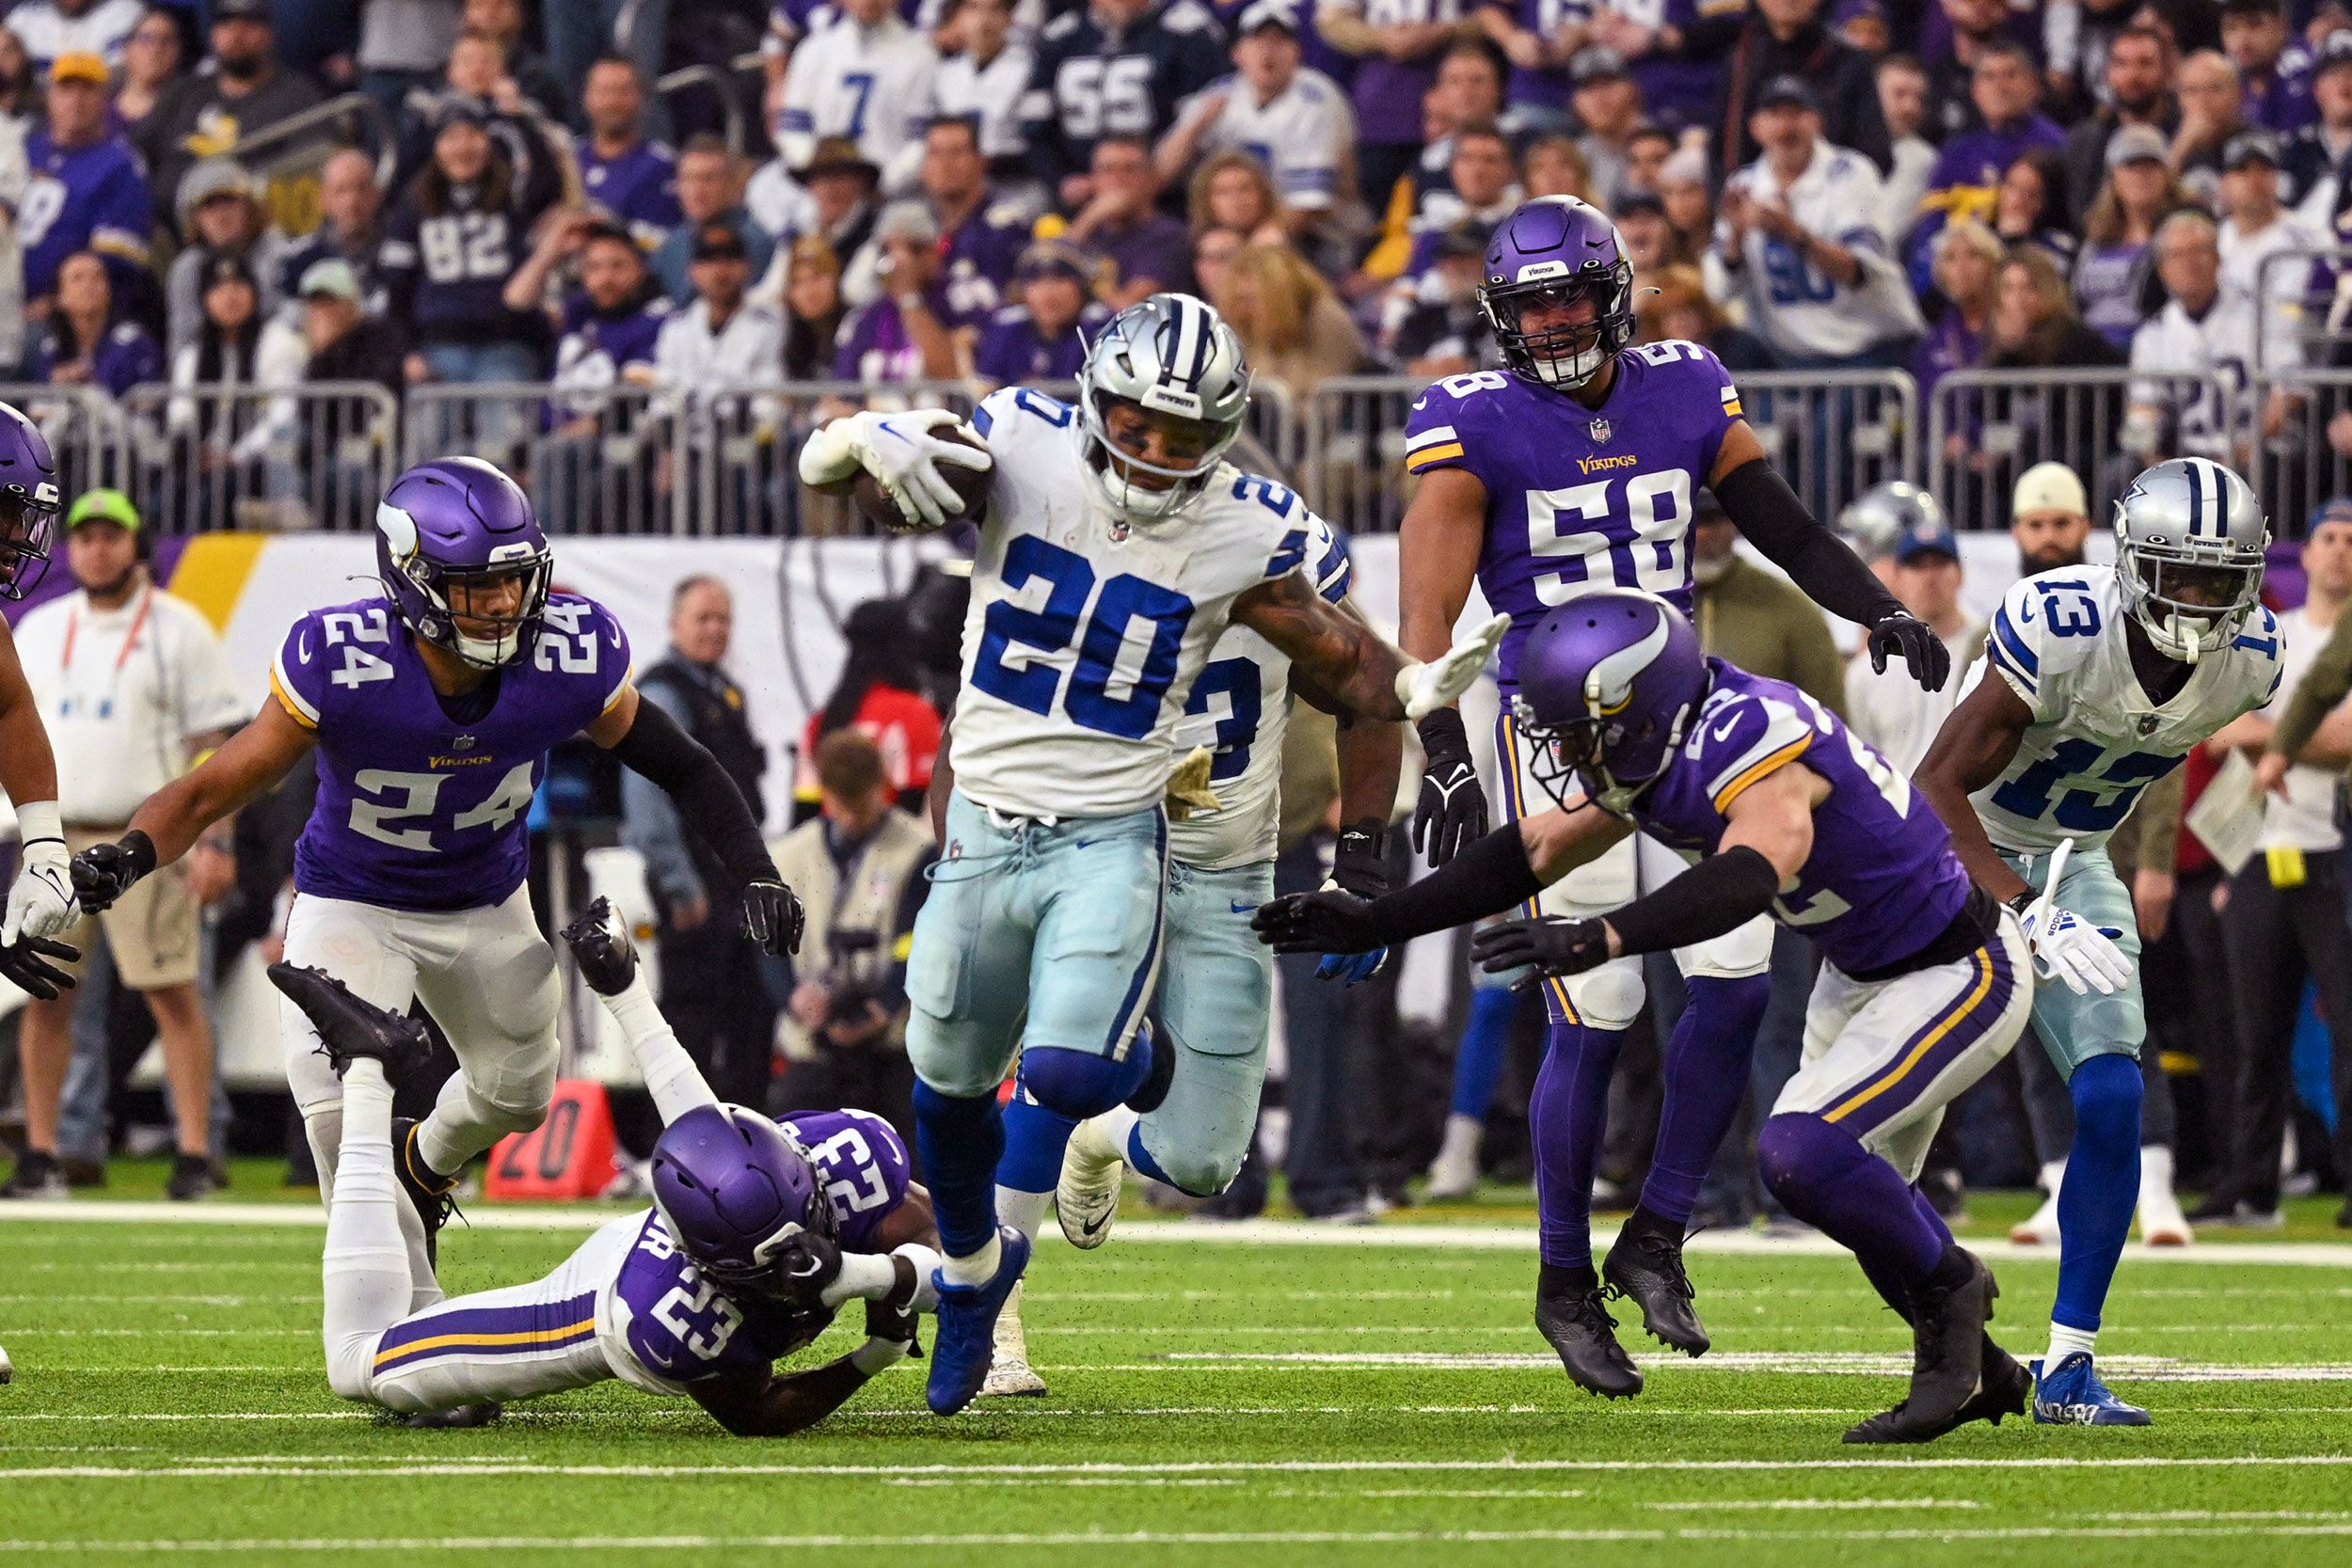 Every touch from Dallas Cowboys running back Tony Pollard's 2-TD game vs.  New York Giants on 'Sunday Night Football'